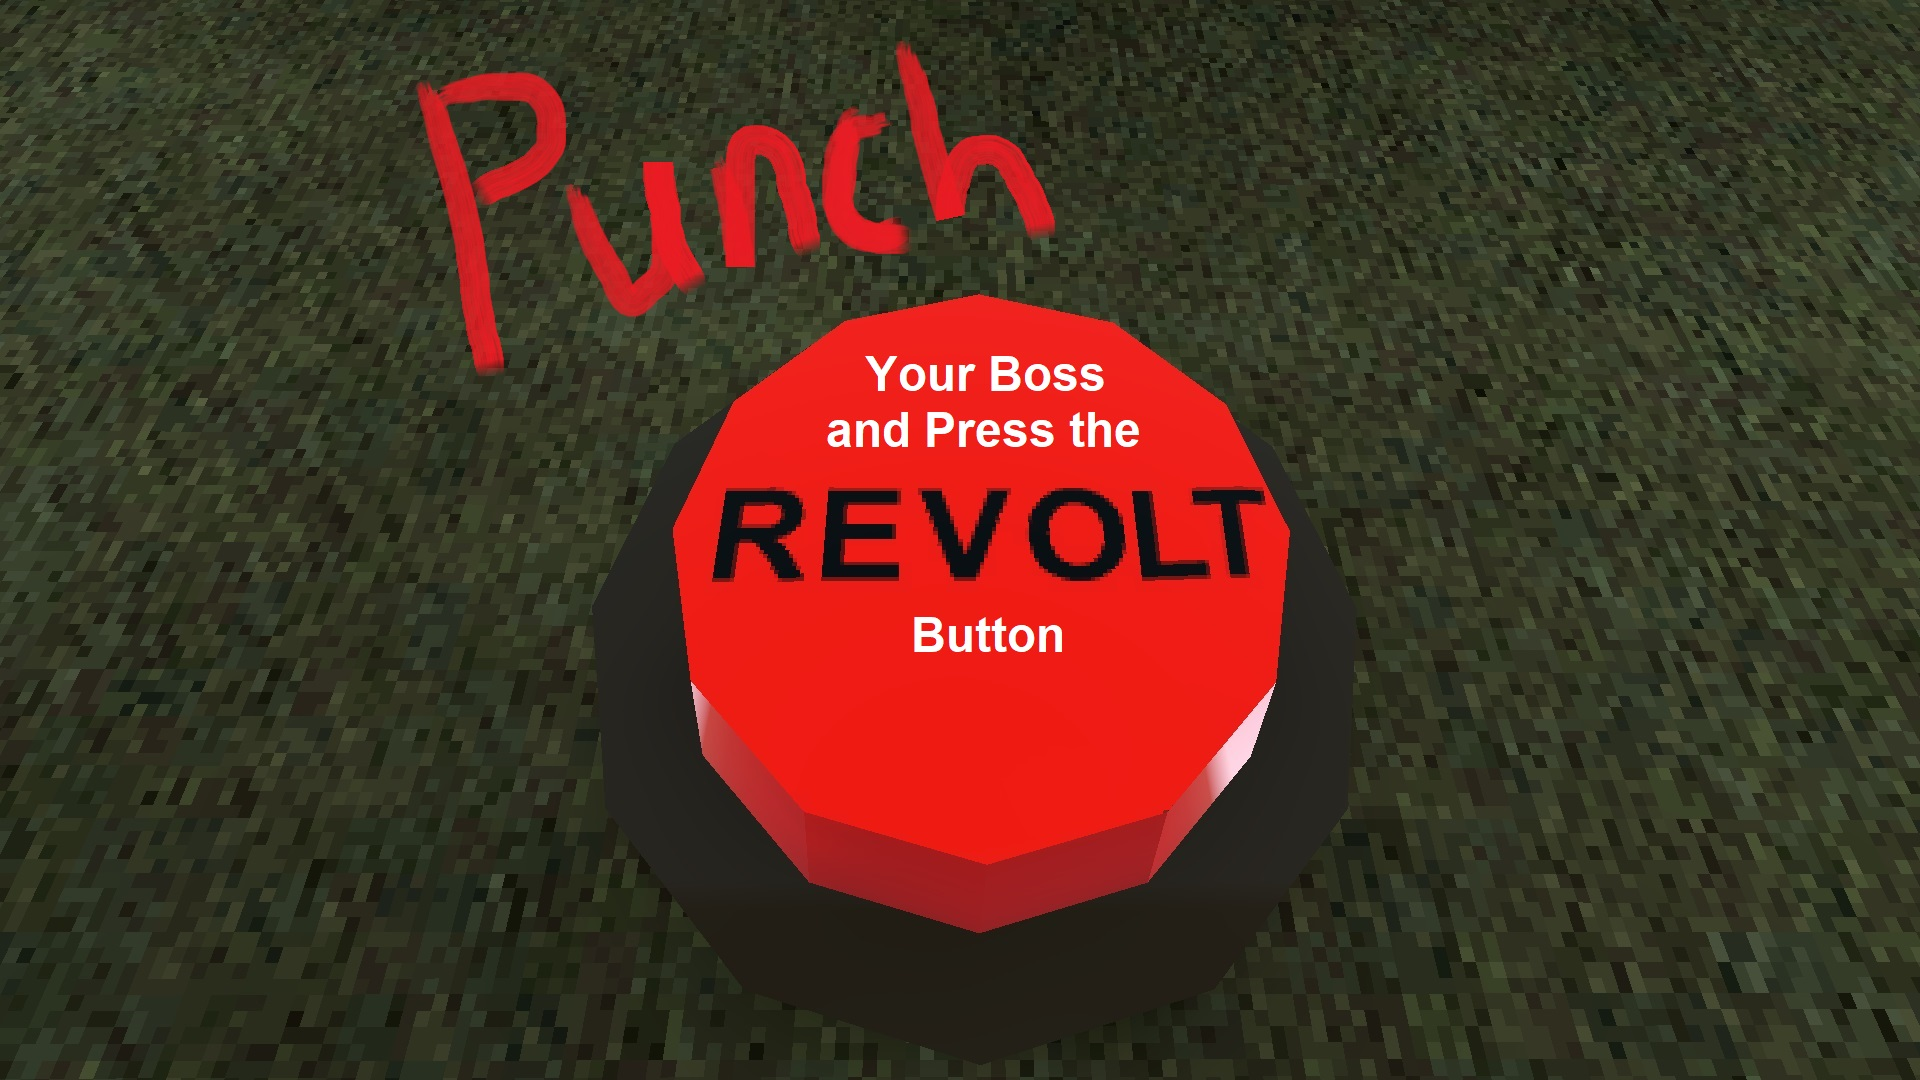 Punch Your Boss and Press the REVOLT Button